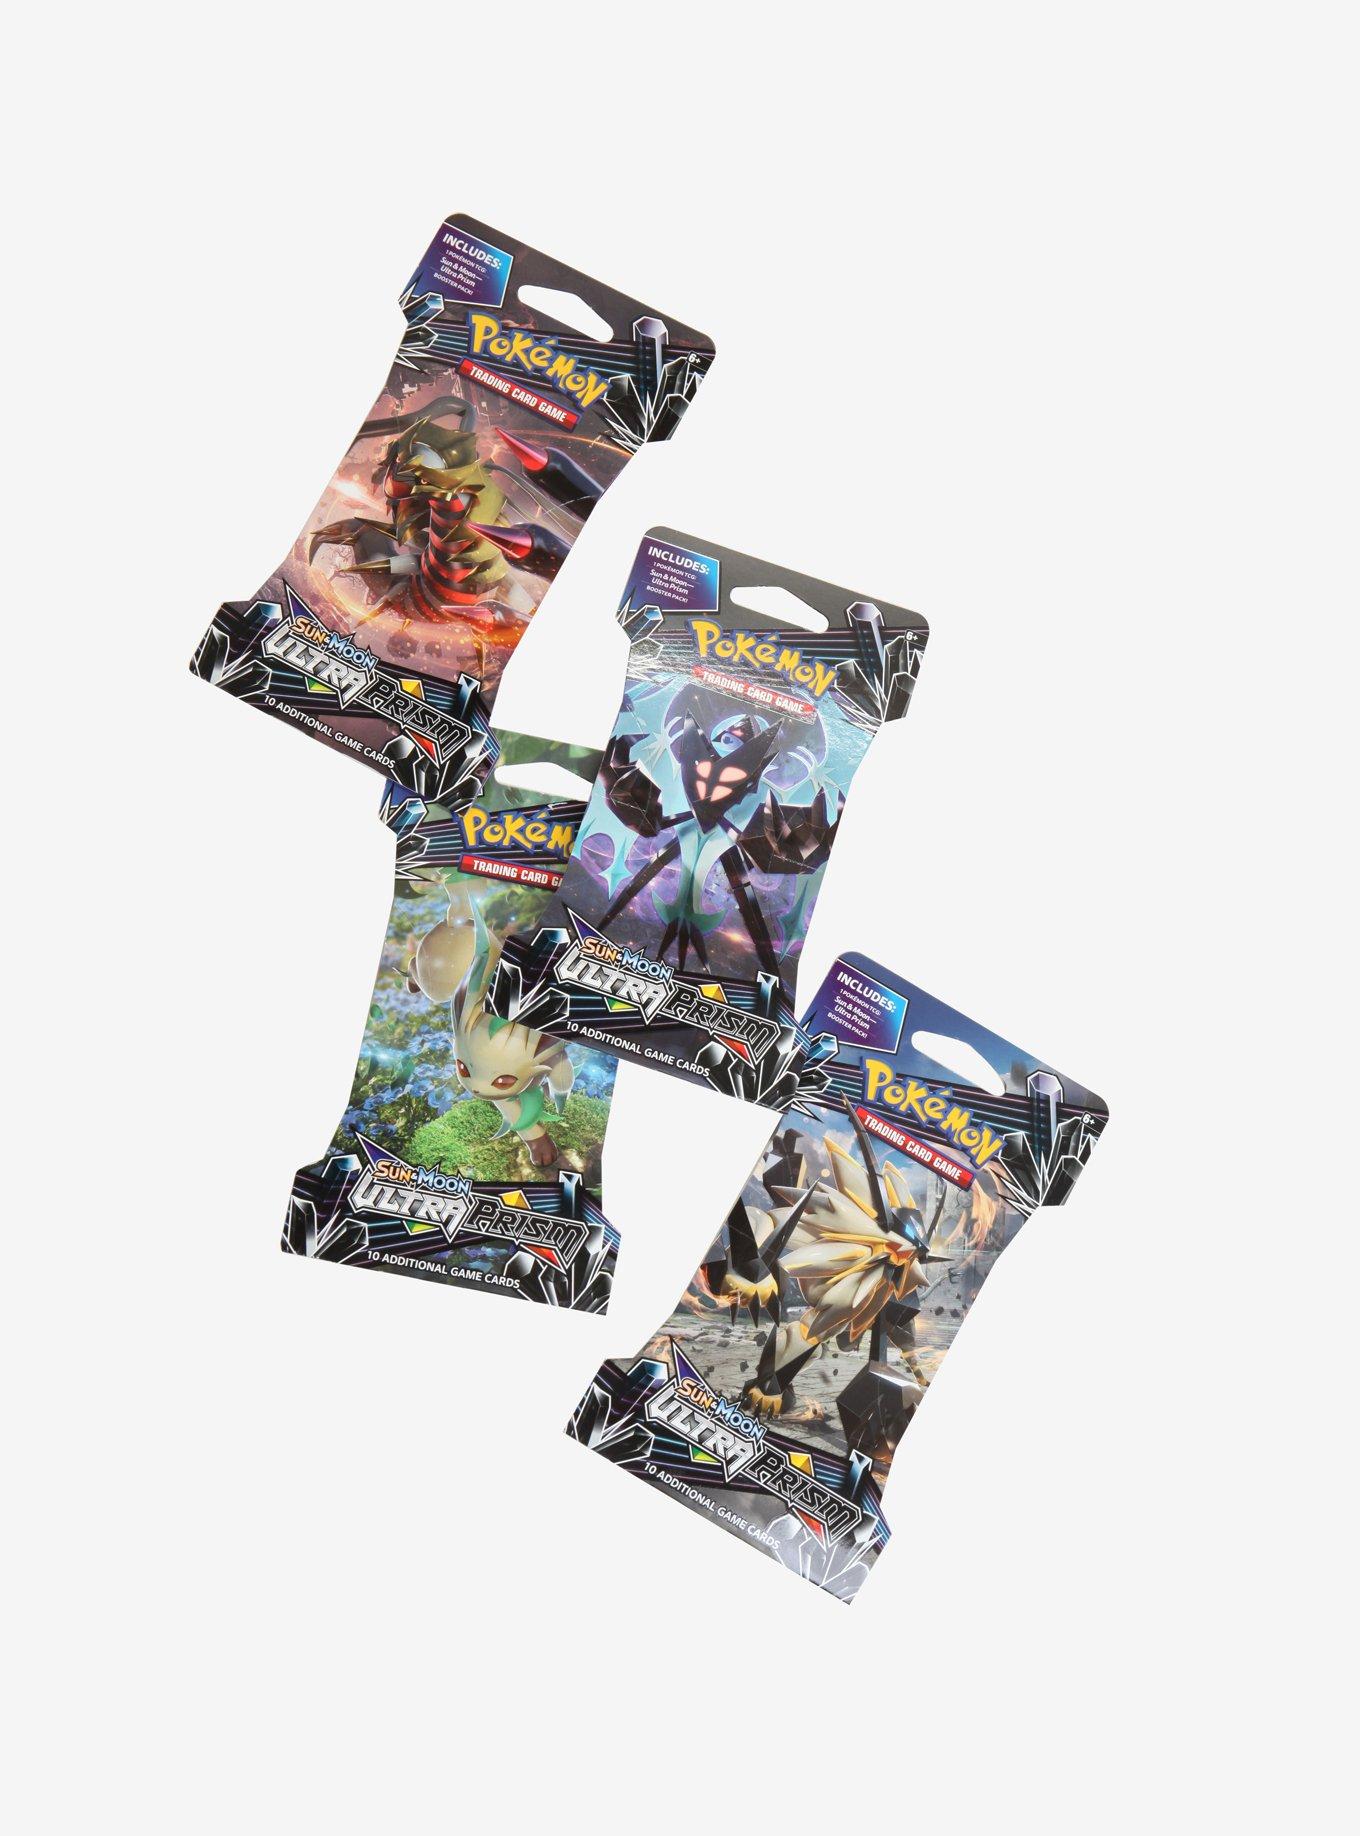 Sun & Moon | Pocket Monsters Pokémon Pencils, 3-Pack | Made In Japan | New!